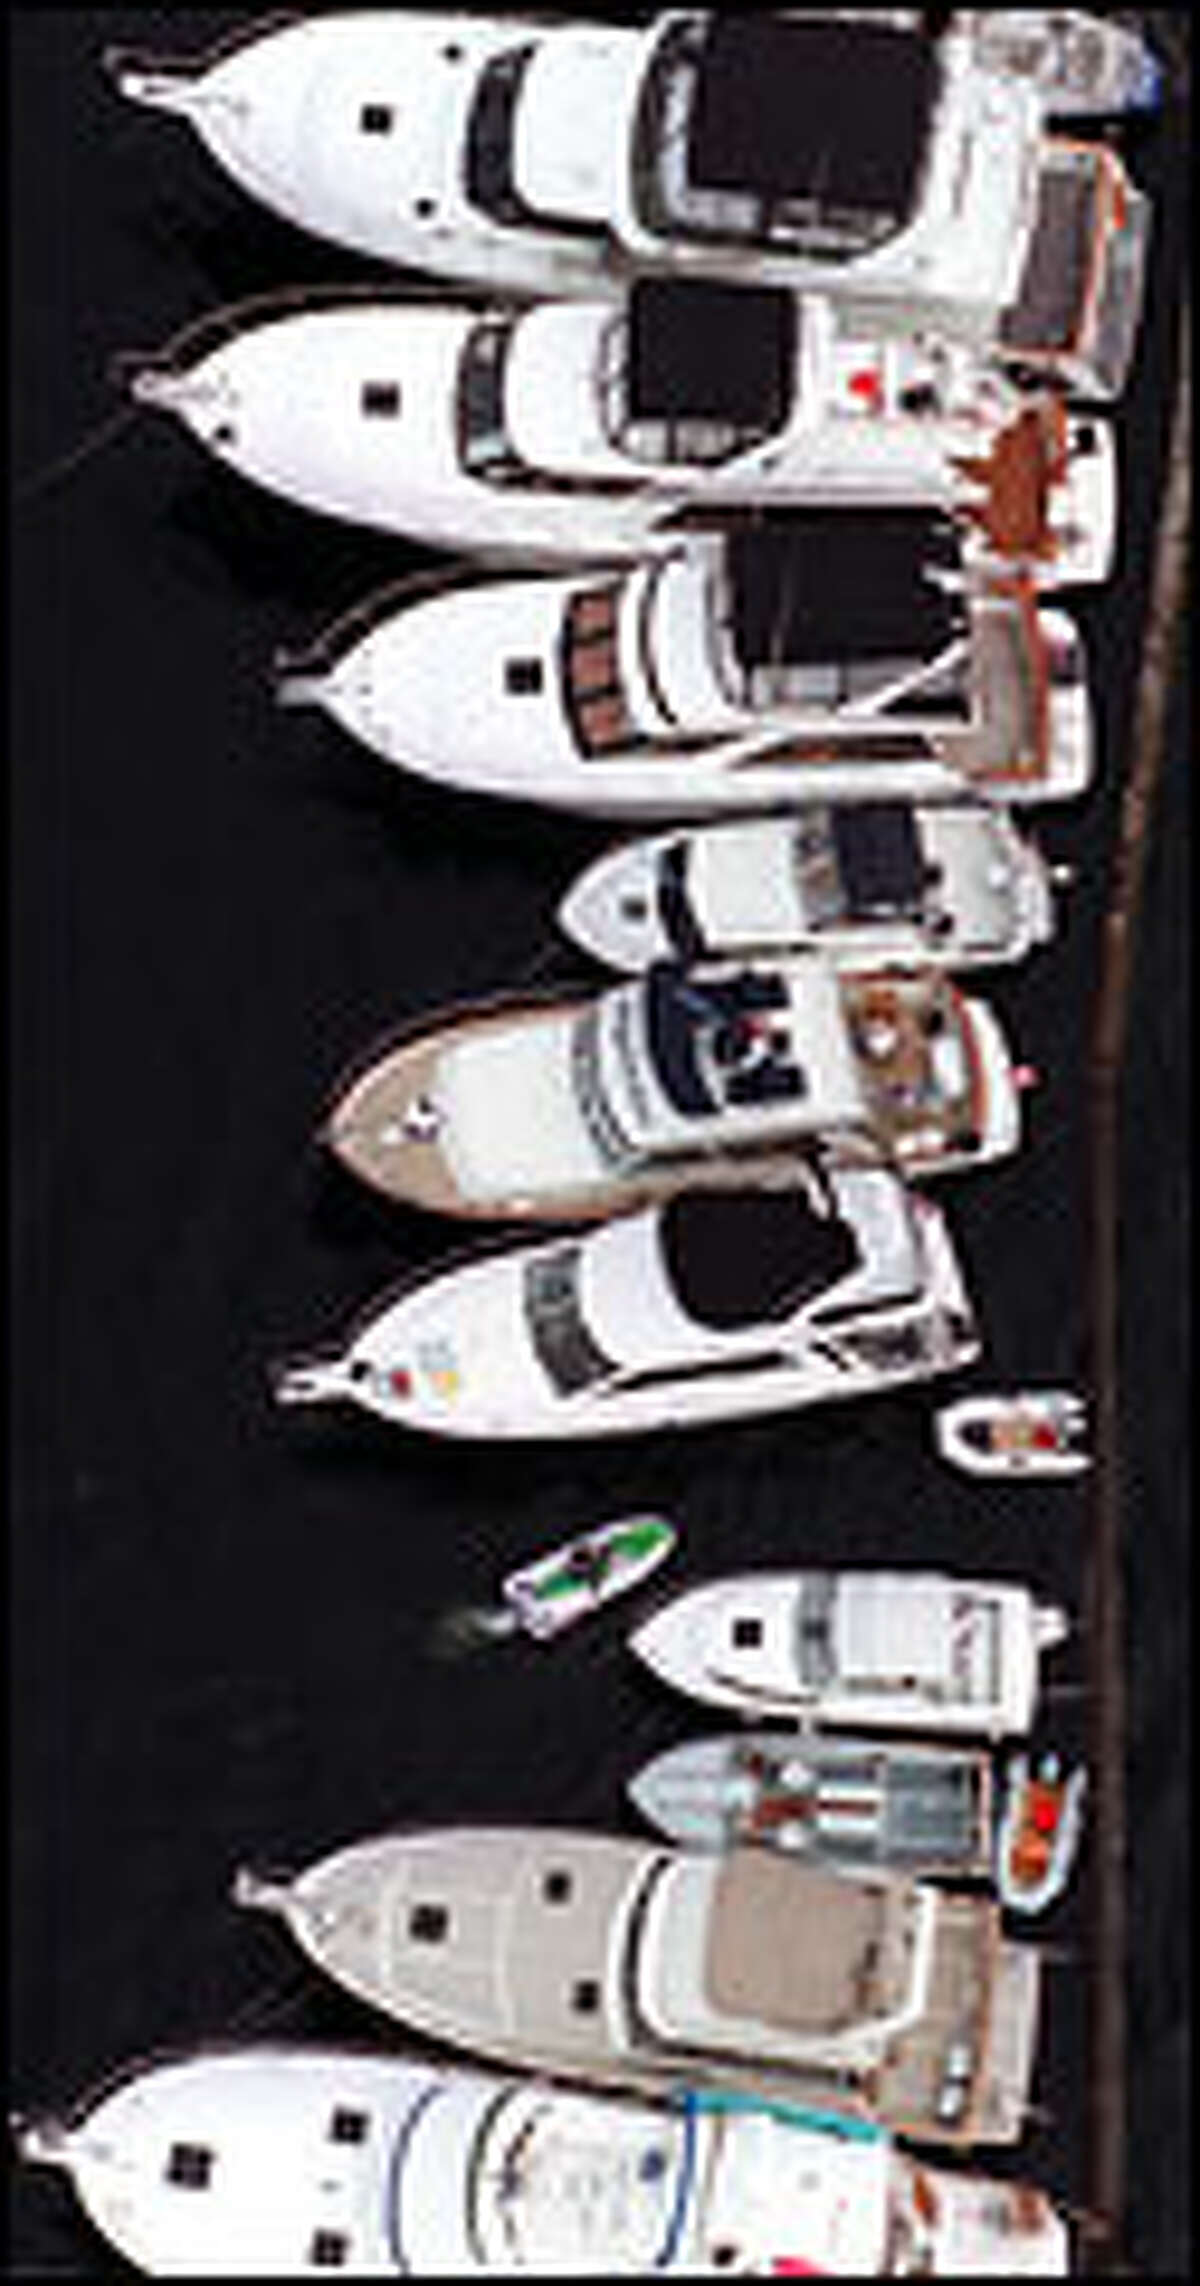 Boats squeeze in along the Montlake Cut; parking is difficult everywhere in Seattle, even on the water.